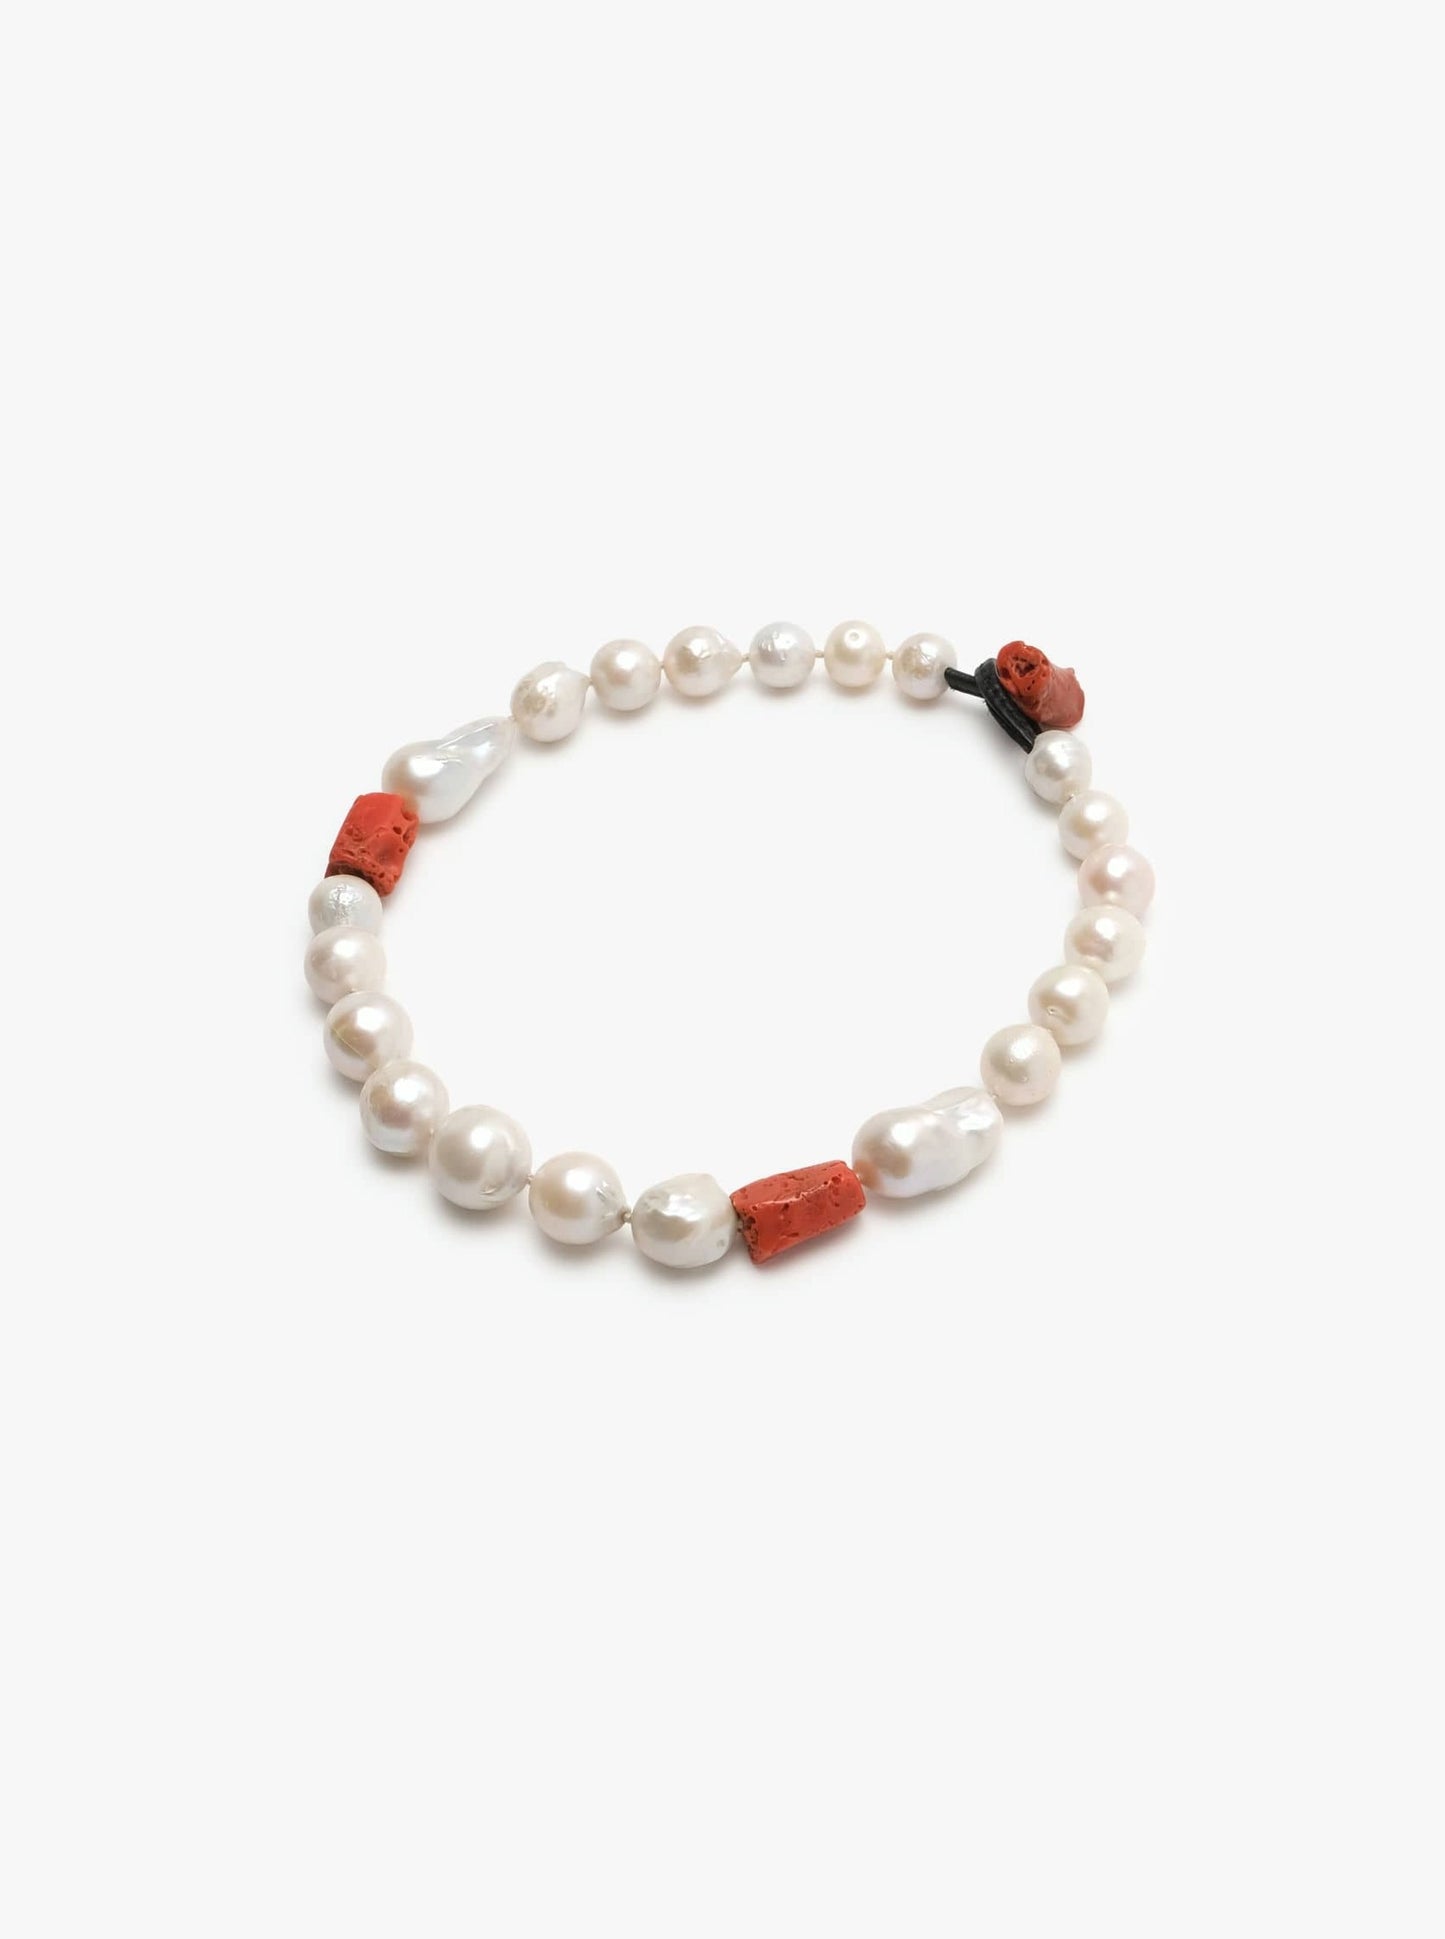 Necklace: freshwater pearls, coral